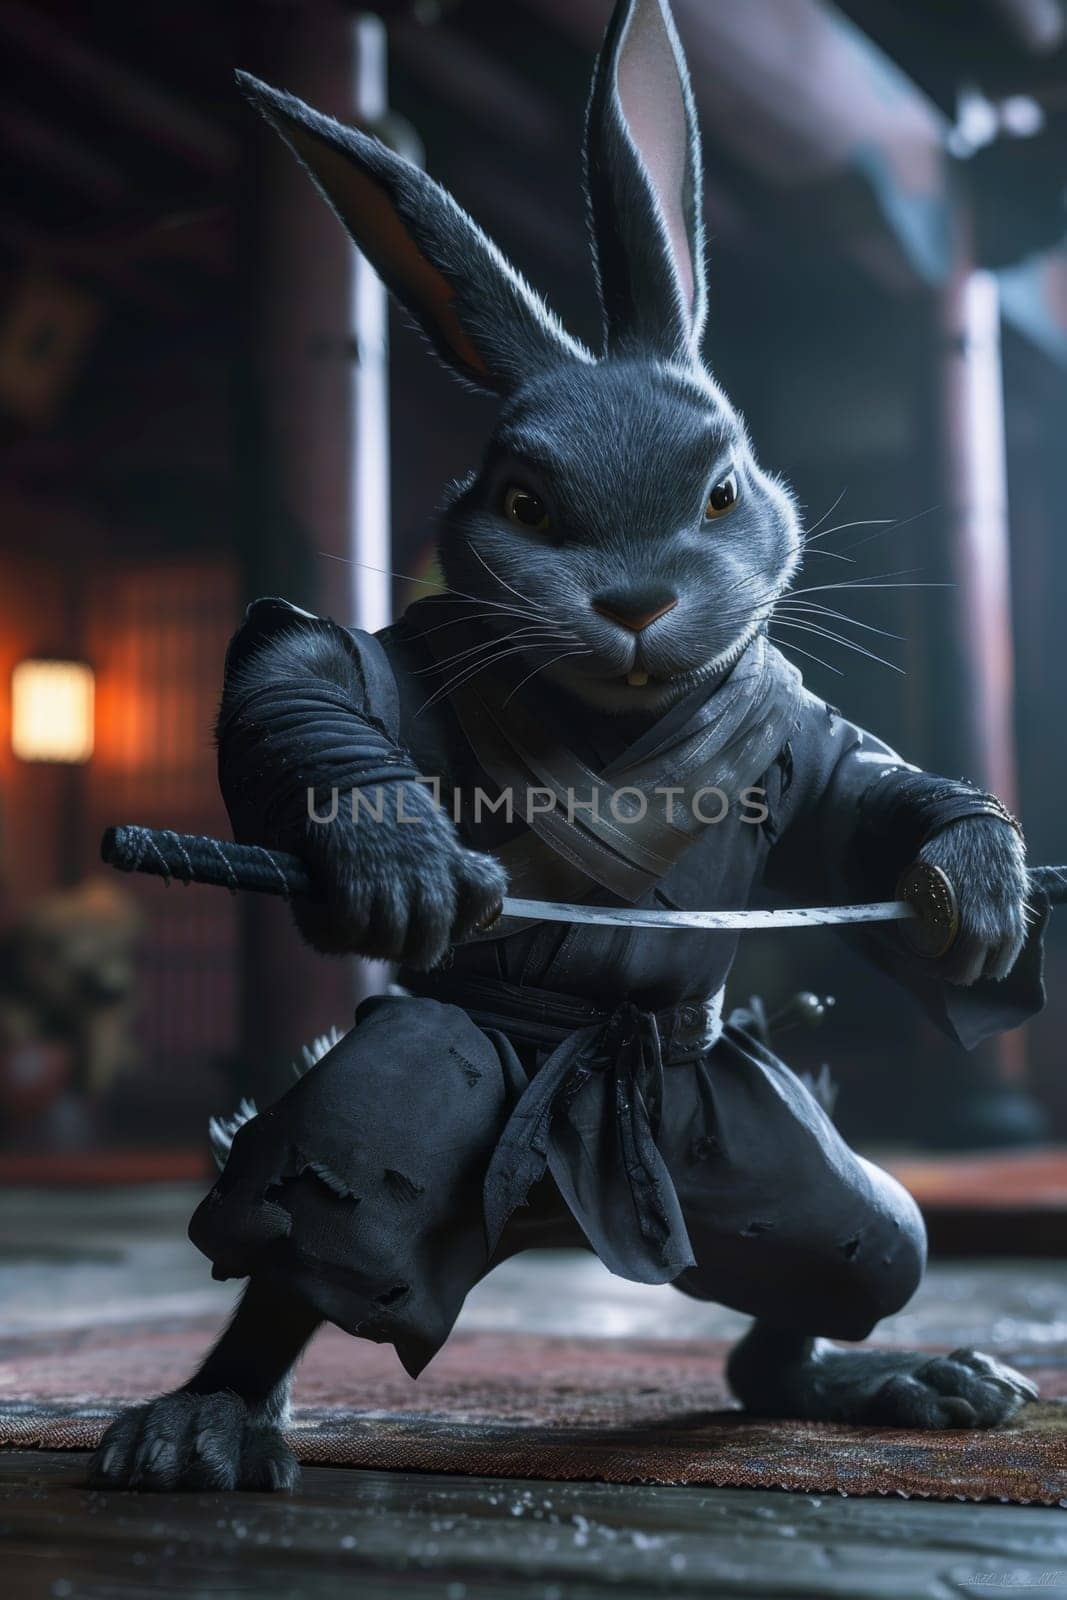 The samurai hare is in the city in the evening. 3d illustration by Lobachad